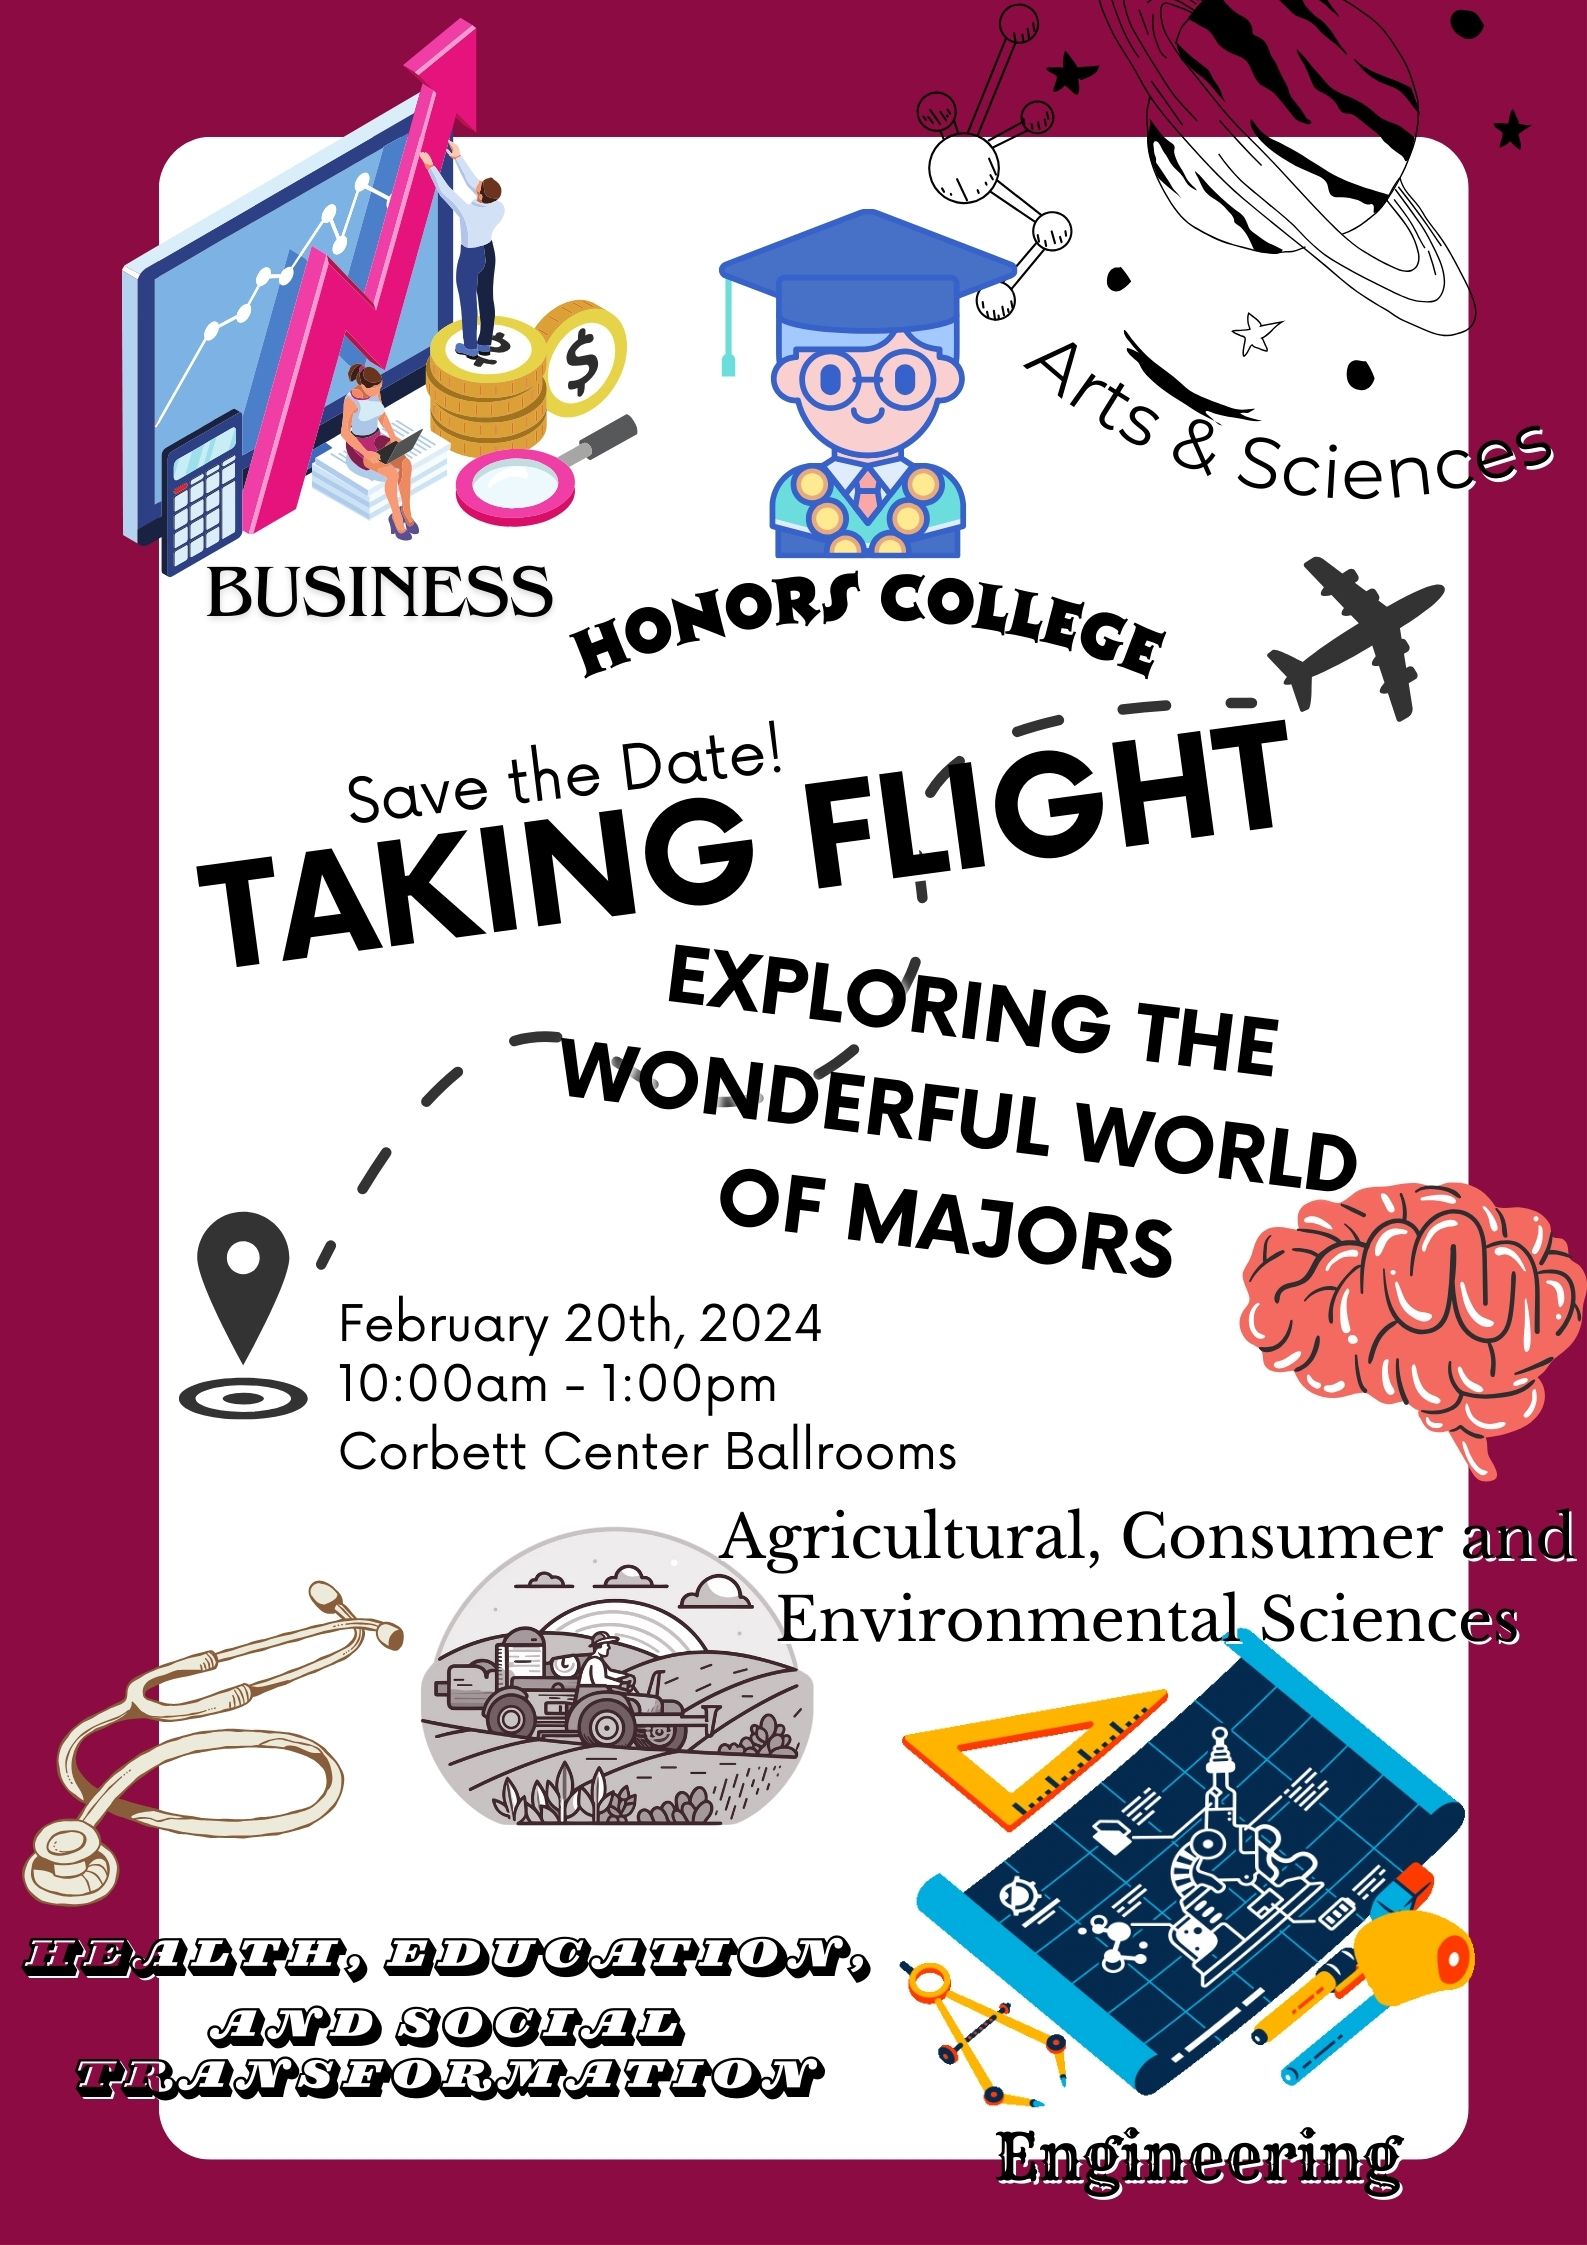 A poster outlining the upcoming Academic Fair